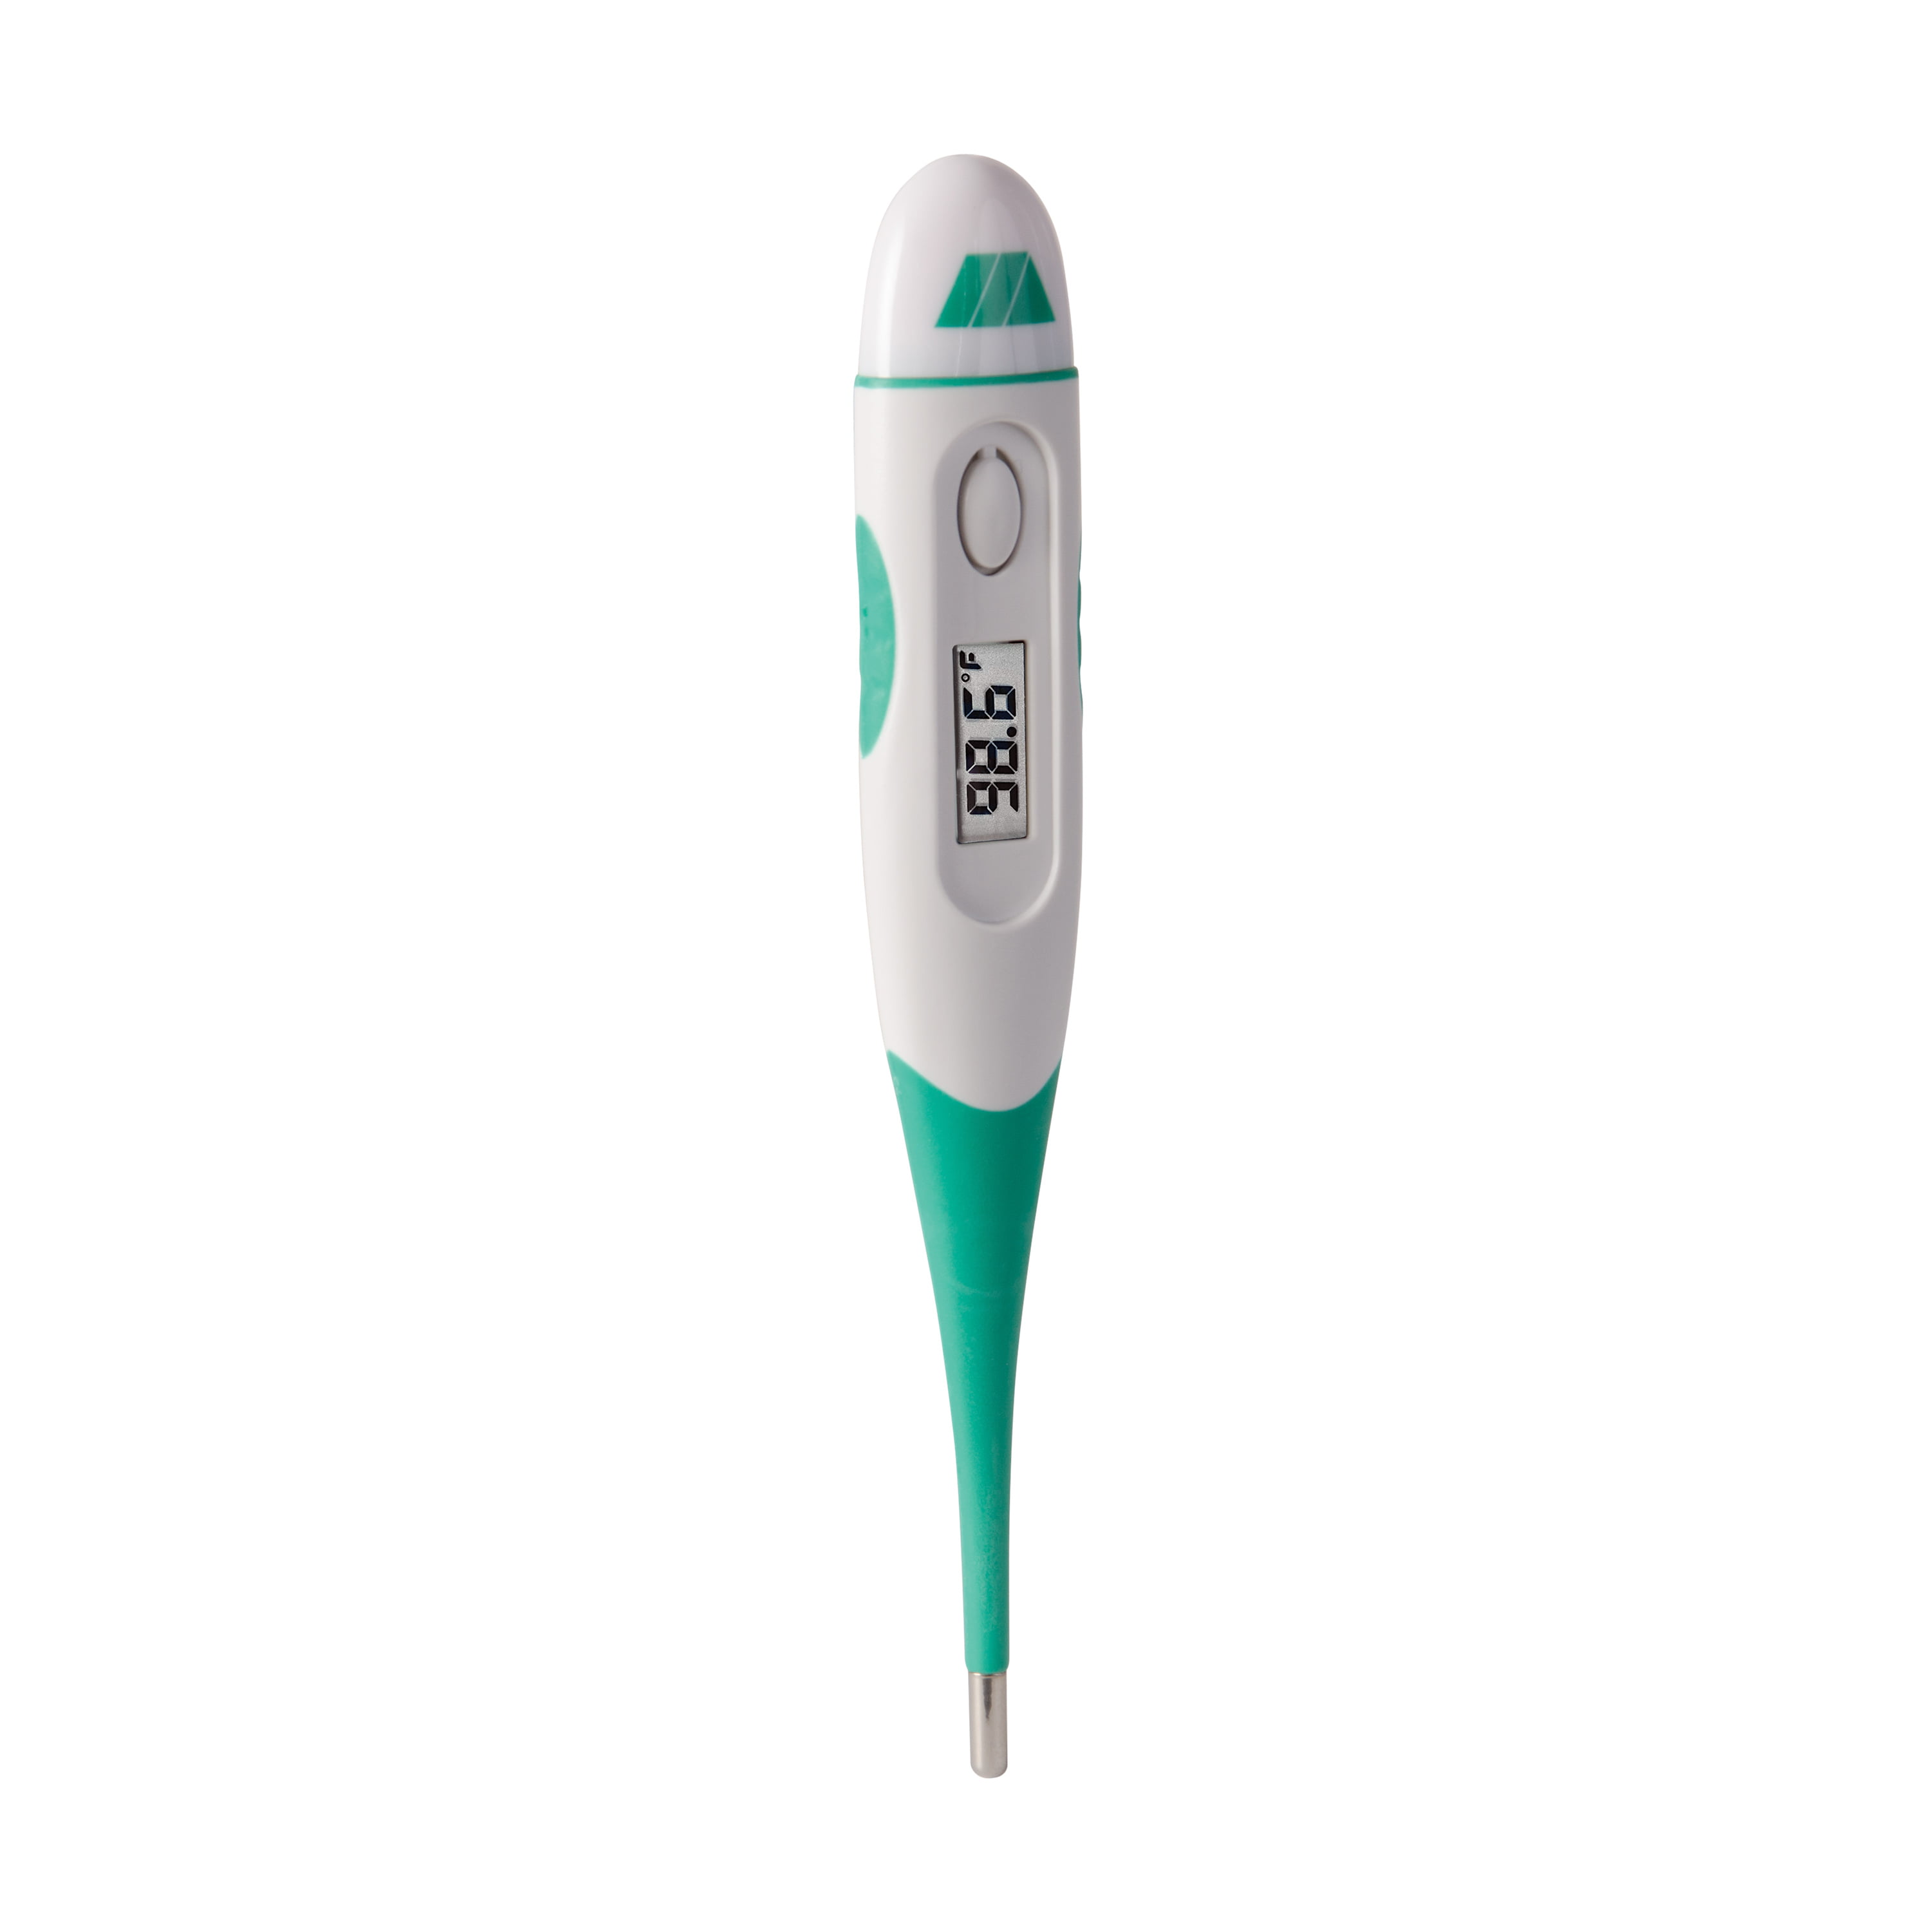 Mabis Glow-in-the-Dark Quick Read Thermometer, 8-Second Medical  Thermometer, Digital Thermometer with Flexible Tip for Fast Oral, Rectal or  Underarm